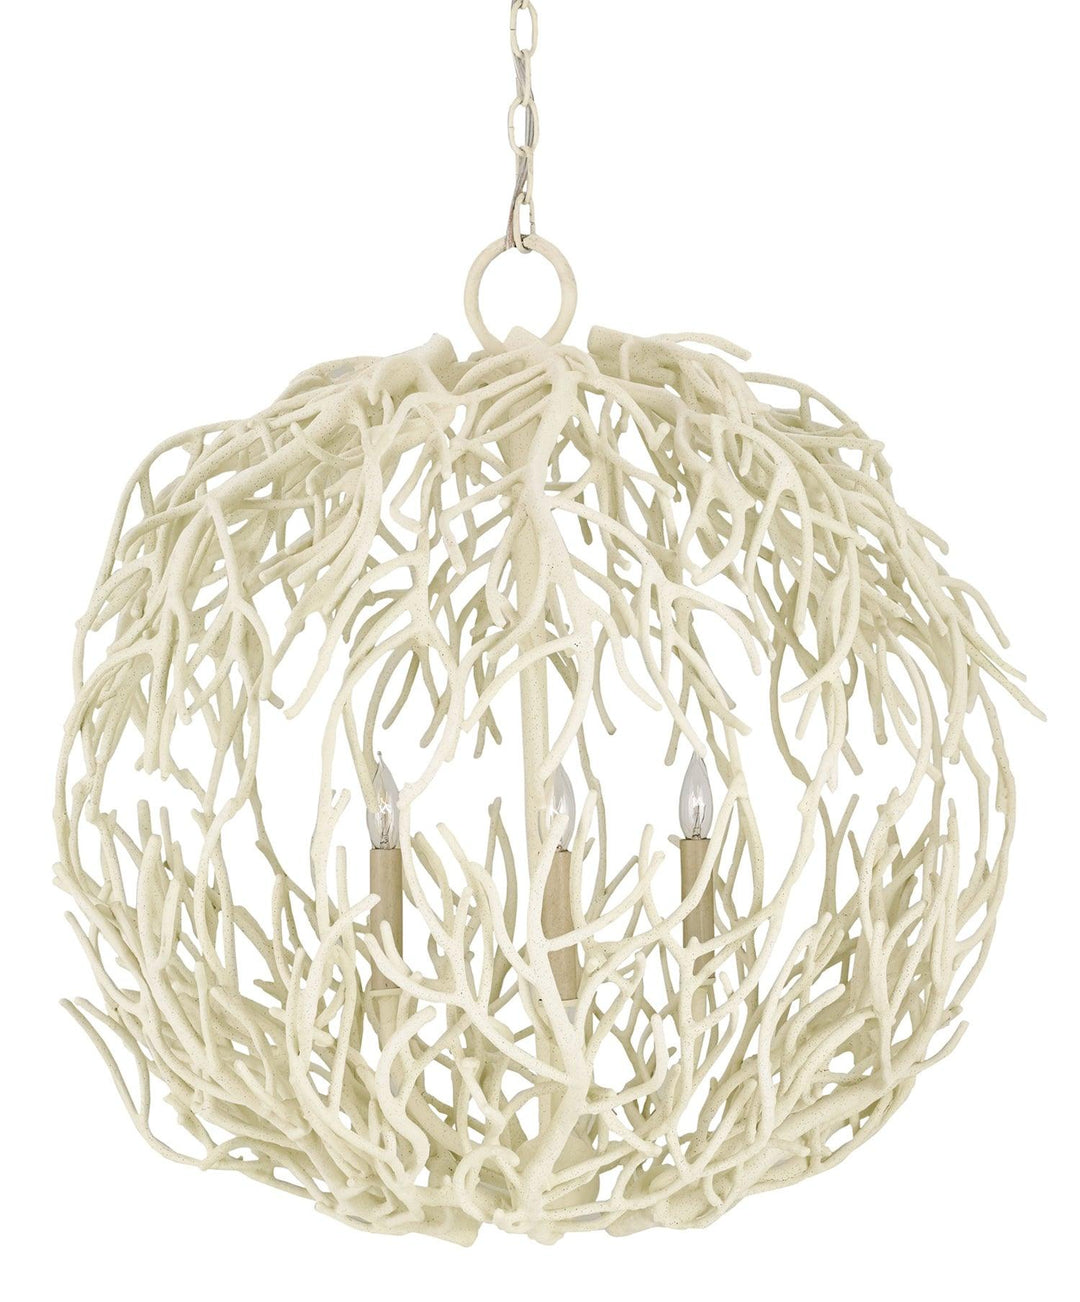 Eventide Orb Chandelier - Casey & Company